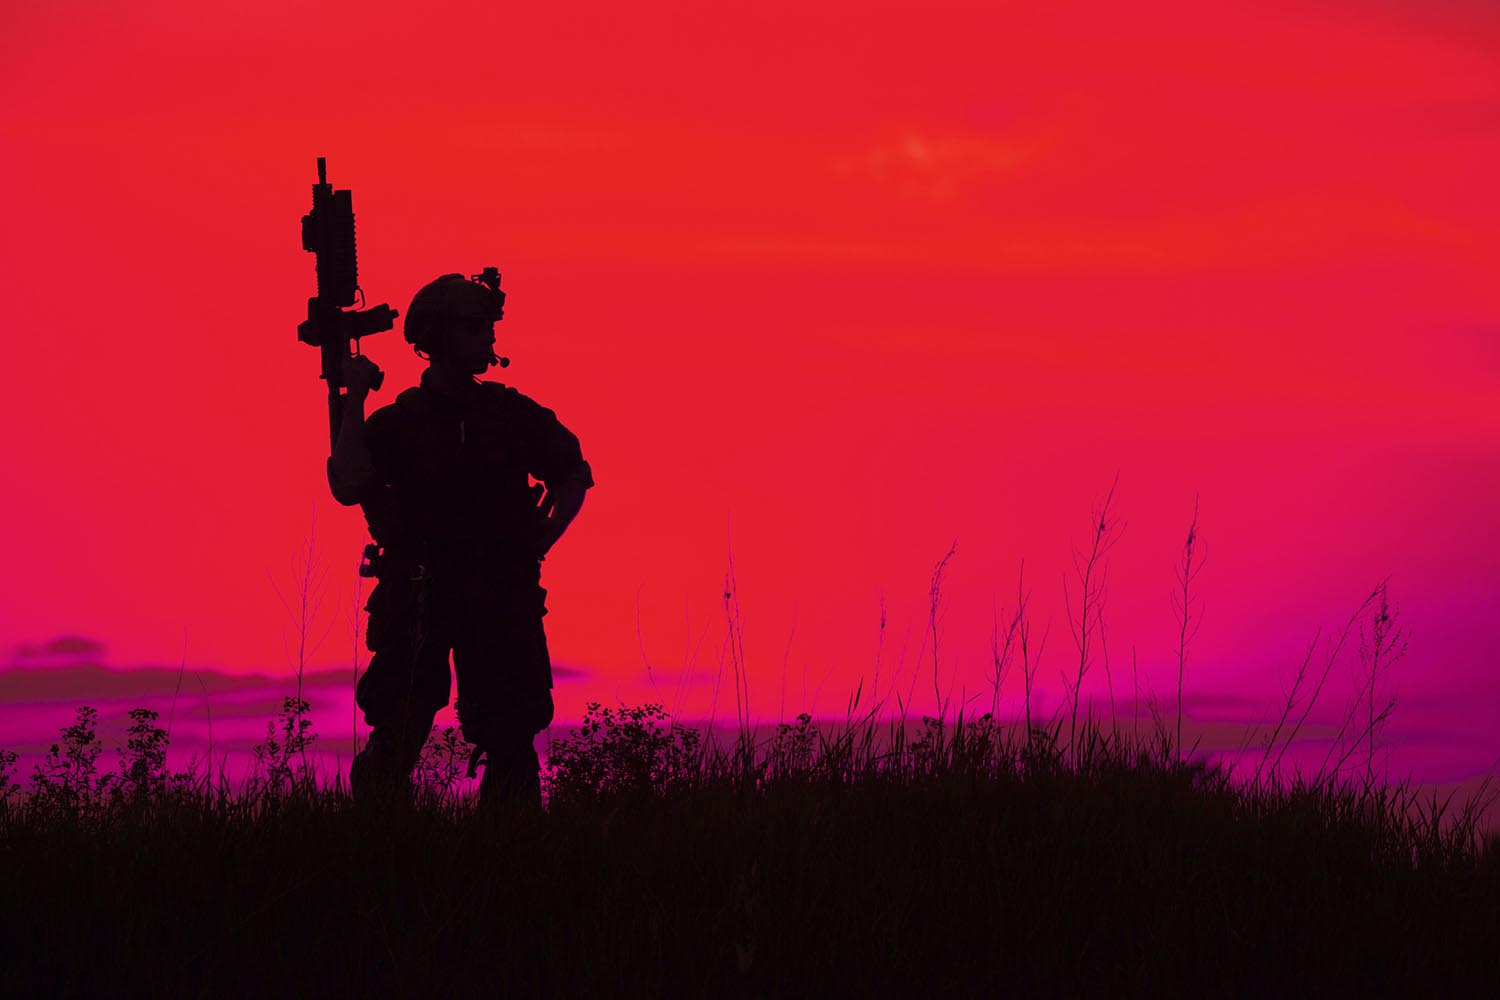 Silhouette of military soldier or officer with weapons at sunset